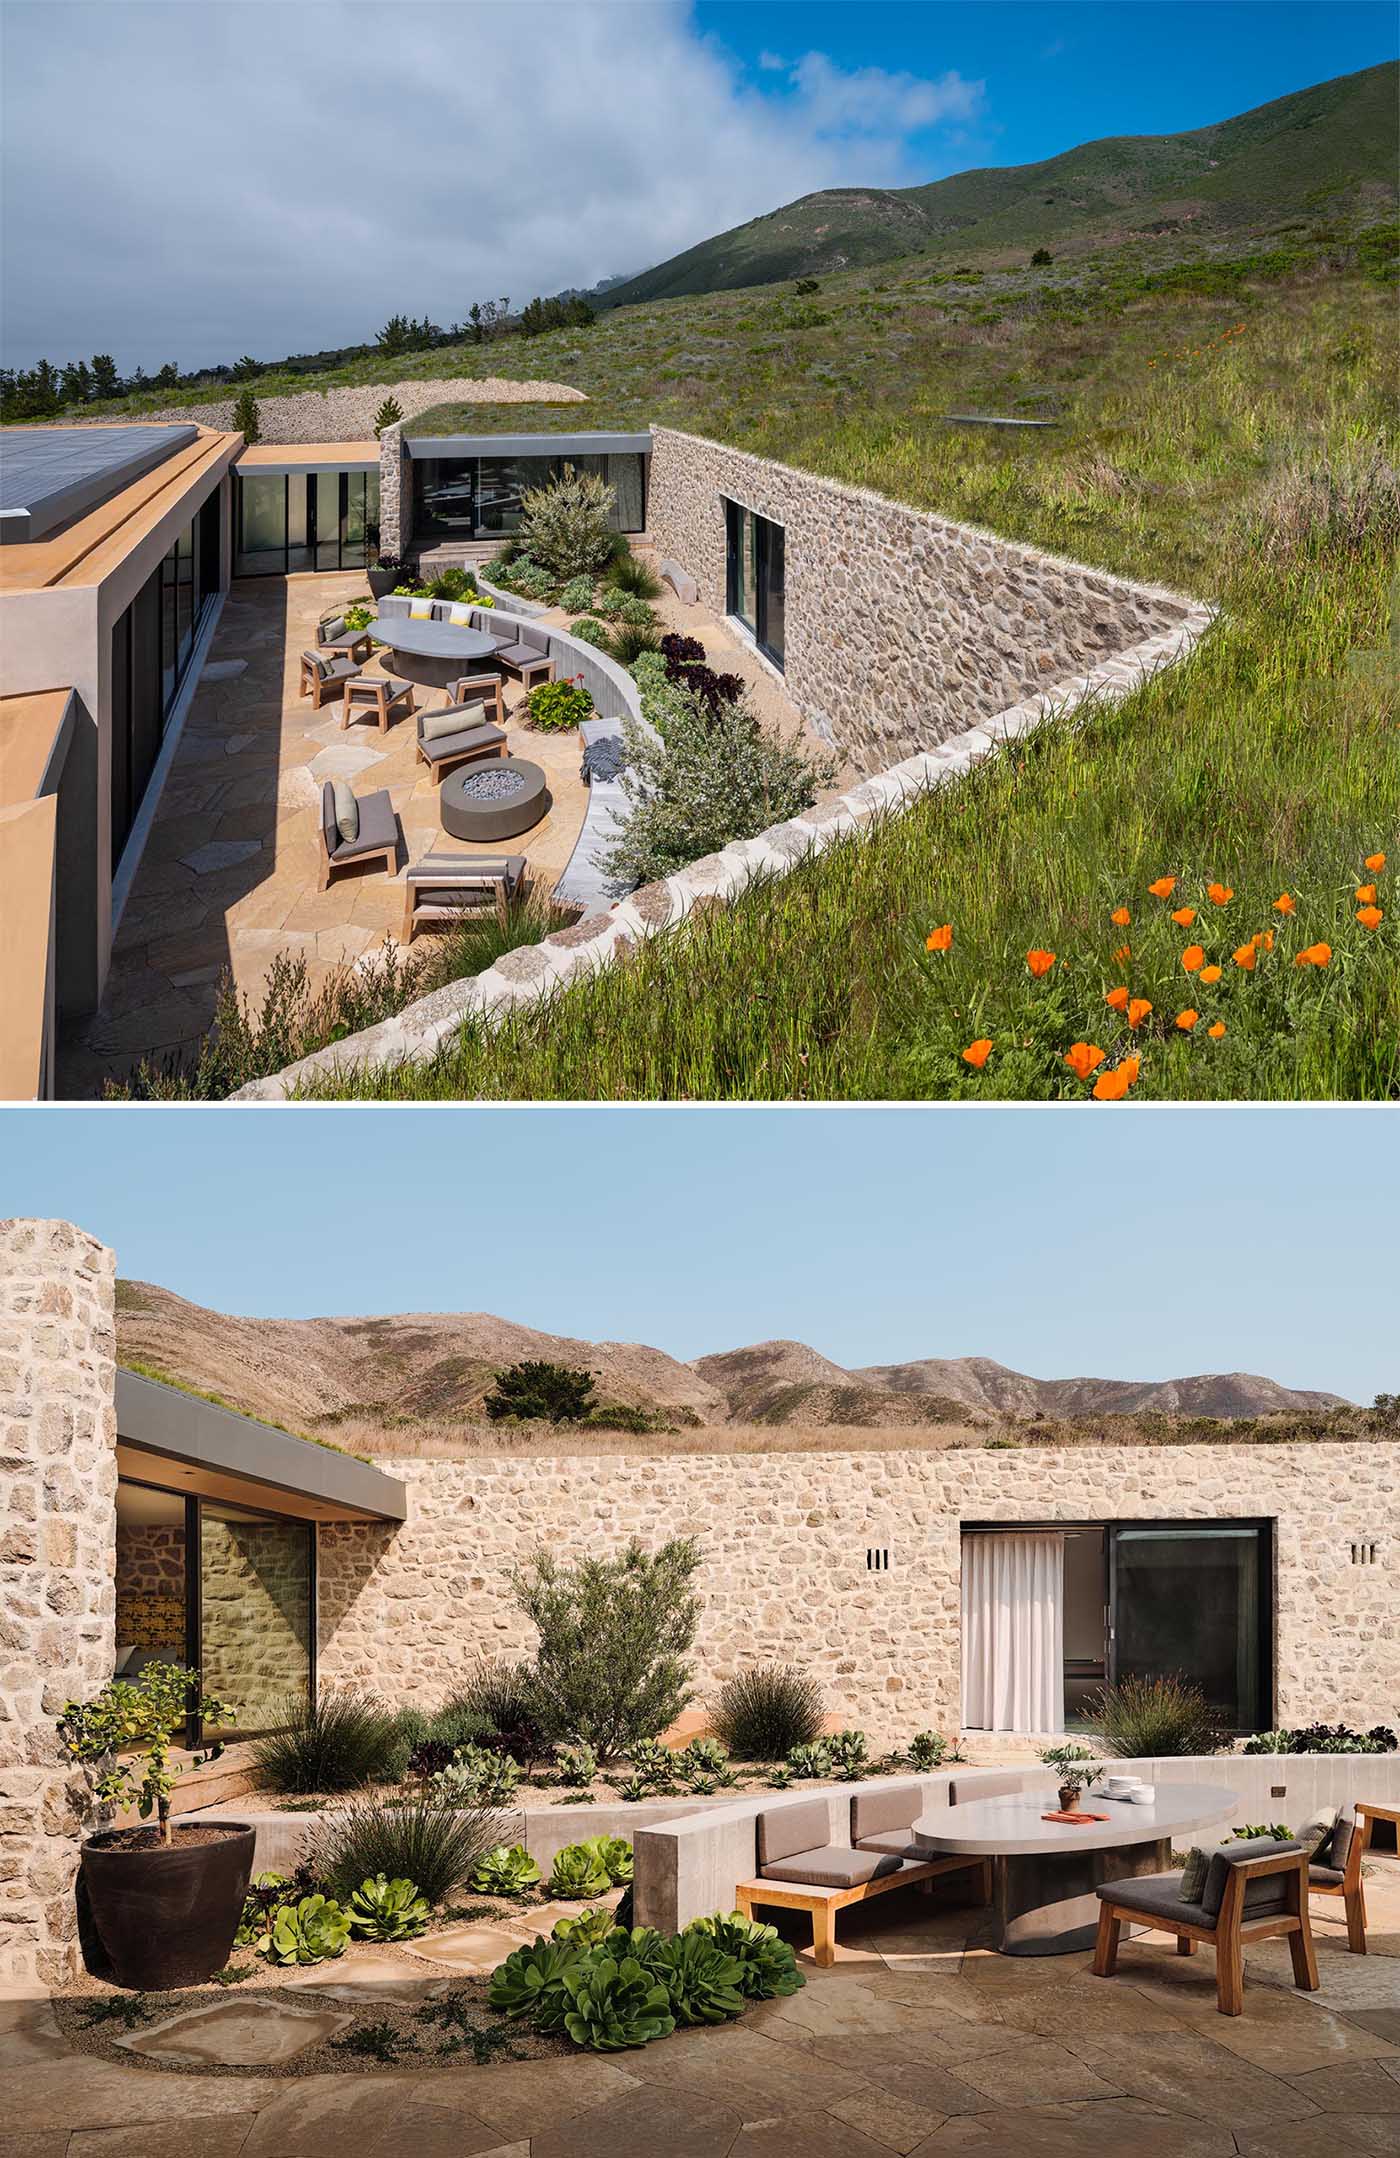 At the rear of this modern home, there's a hidden patio  that has the stone walls as a backdrop. Included in the patio design is a curved concrete wall with built-in seating, a fire pit, and a garden with desert plants.